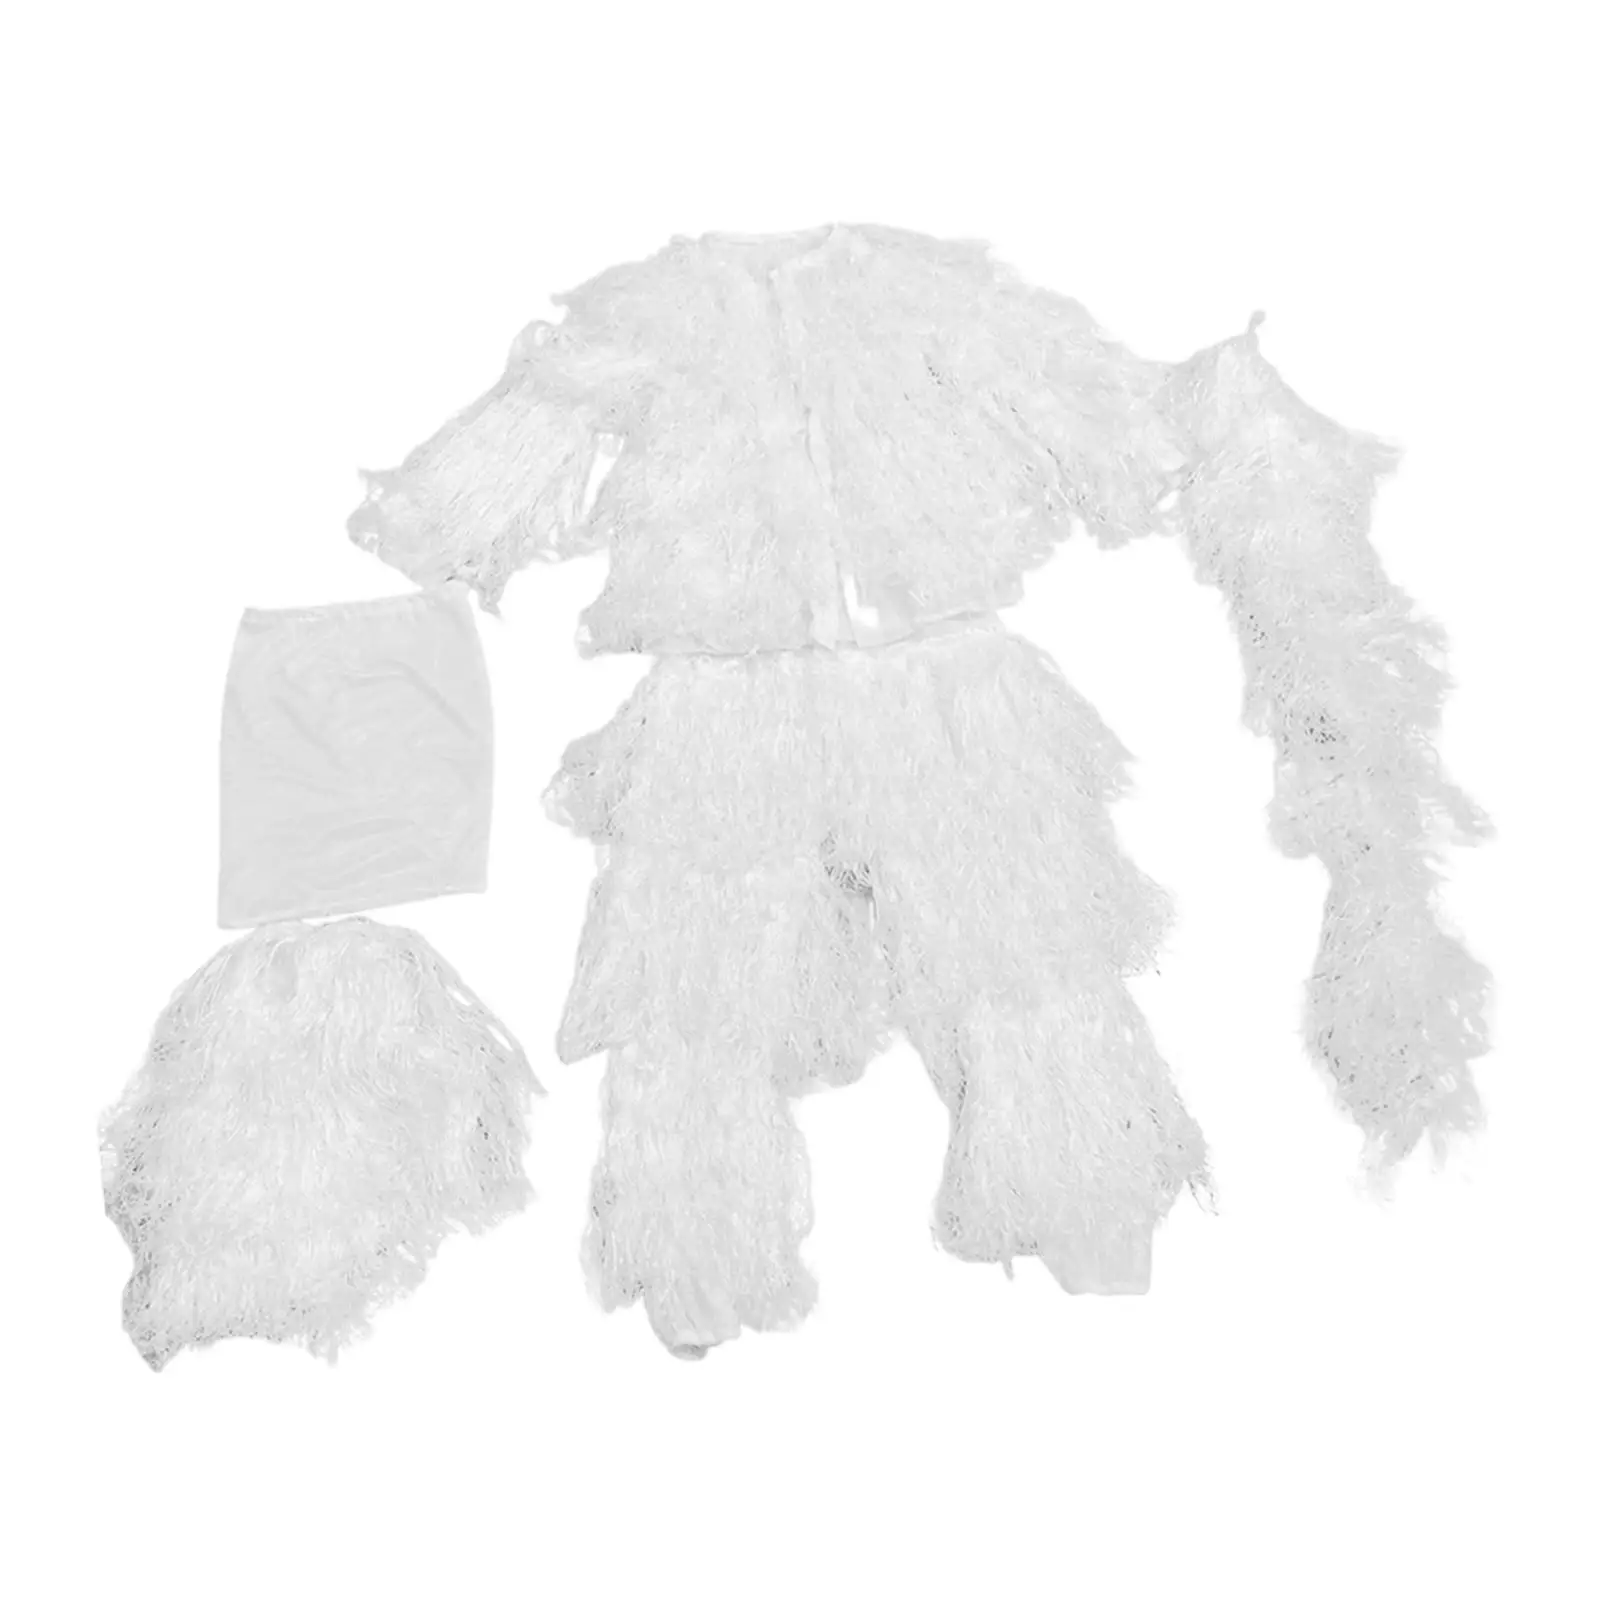 Ghillie suit for kids, outfit, jacket, clothing for hunting, Halloween,